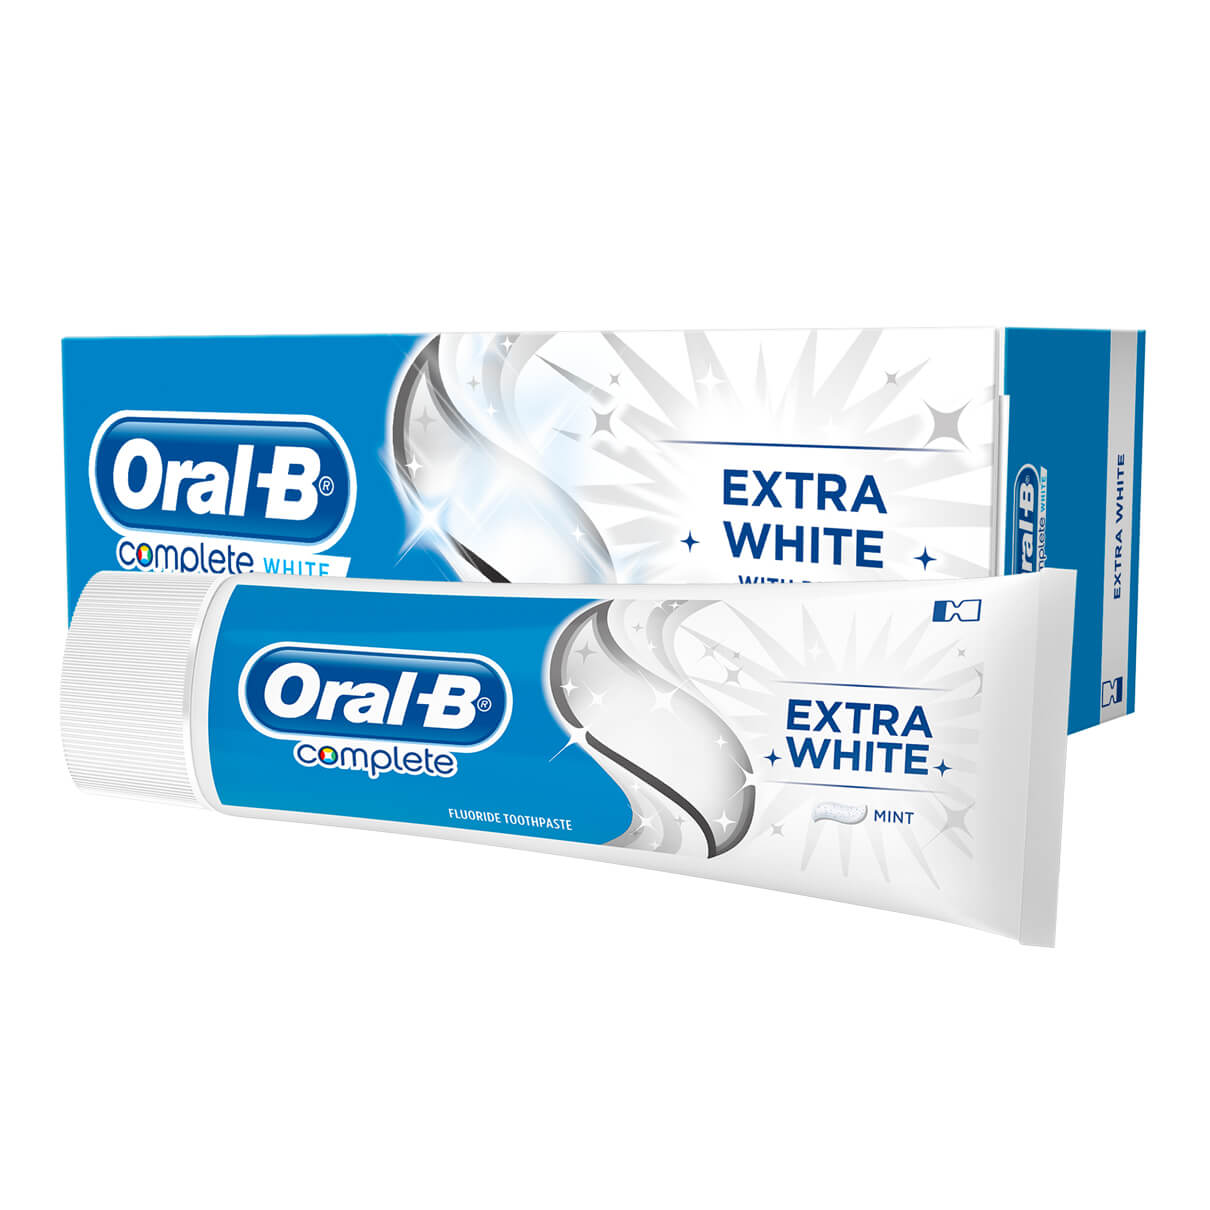 Oral-B Complete Extra White Toothpaste undefined